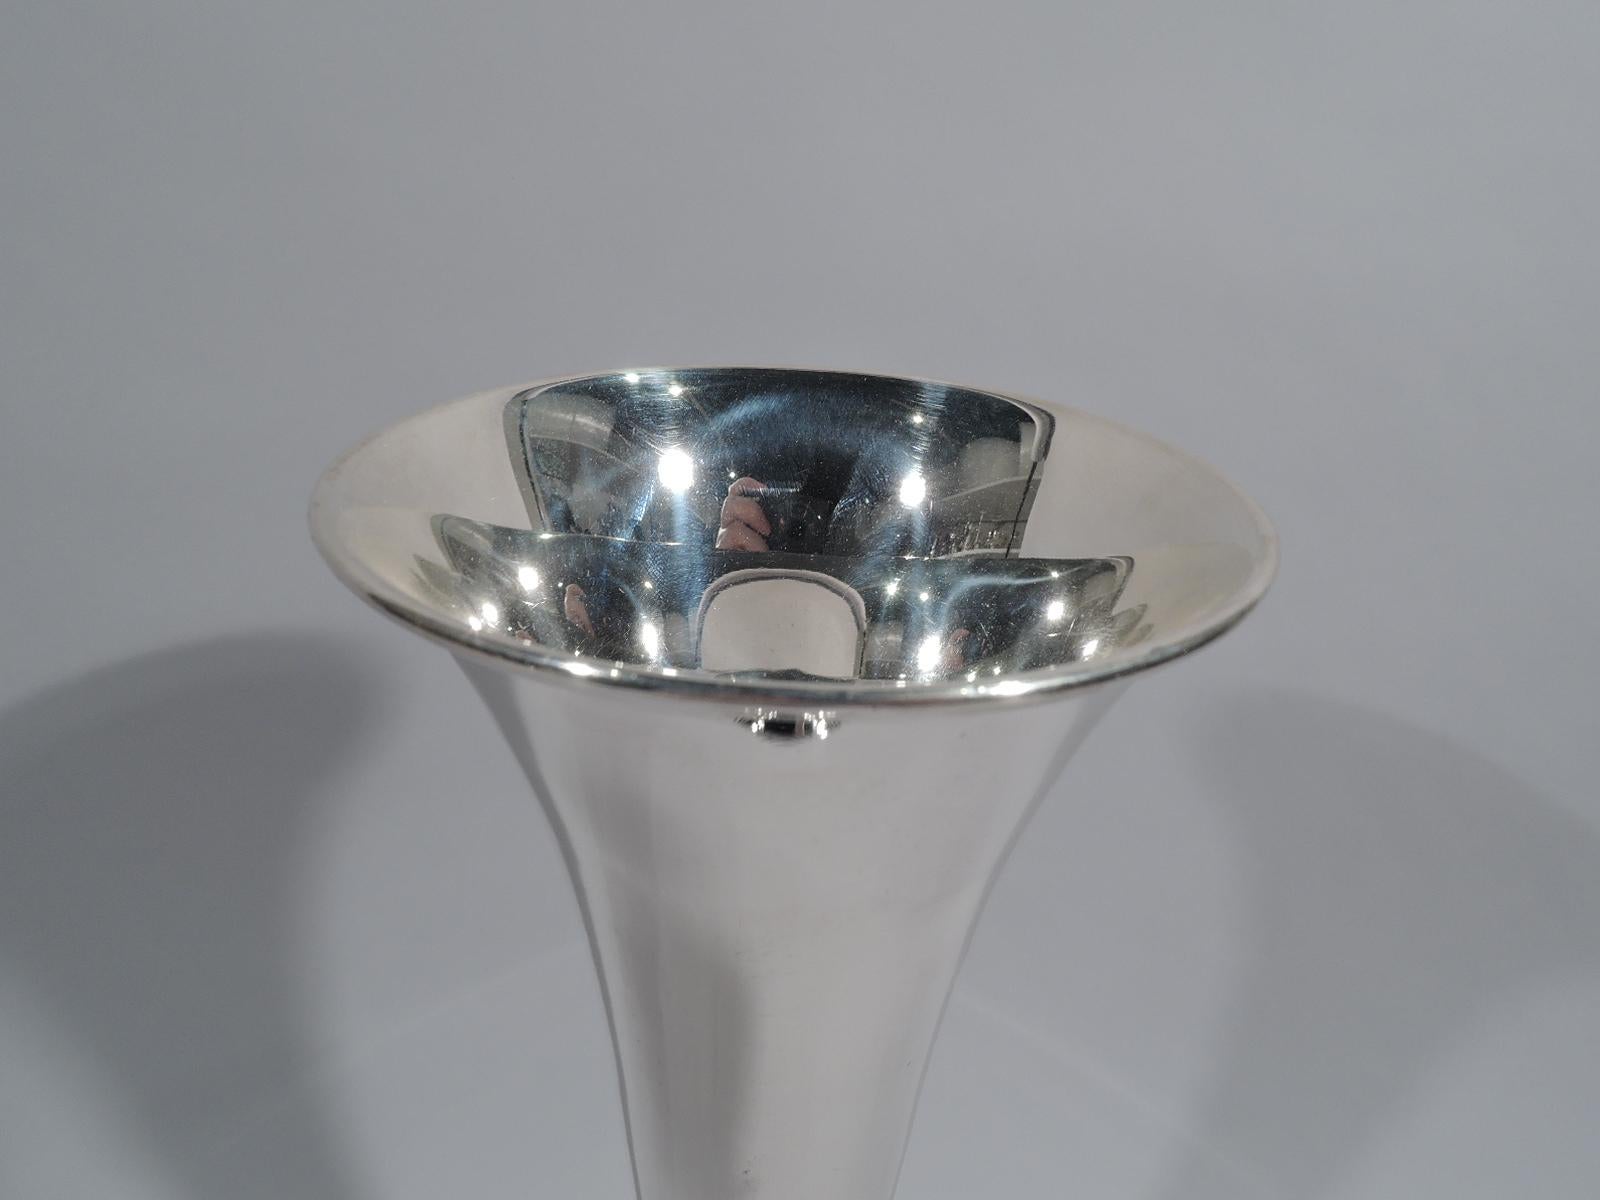 Art Deco sterling silver trumpet vase. Made by Tiffany & Co. in New York, circa 1915. Tall and slender cone with flared rim and ribbed base knop on round and stepped foot. Fully marked including pattern no. 18870 (first produced in 1915) and